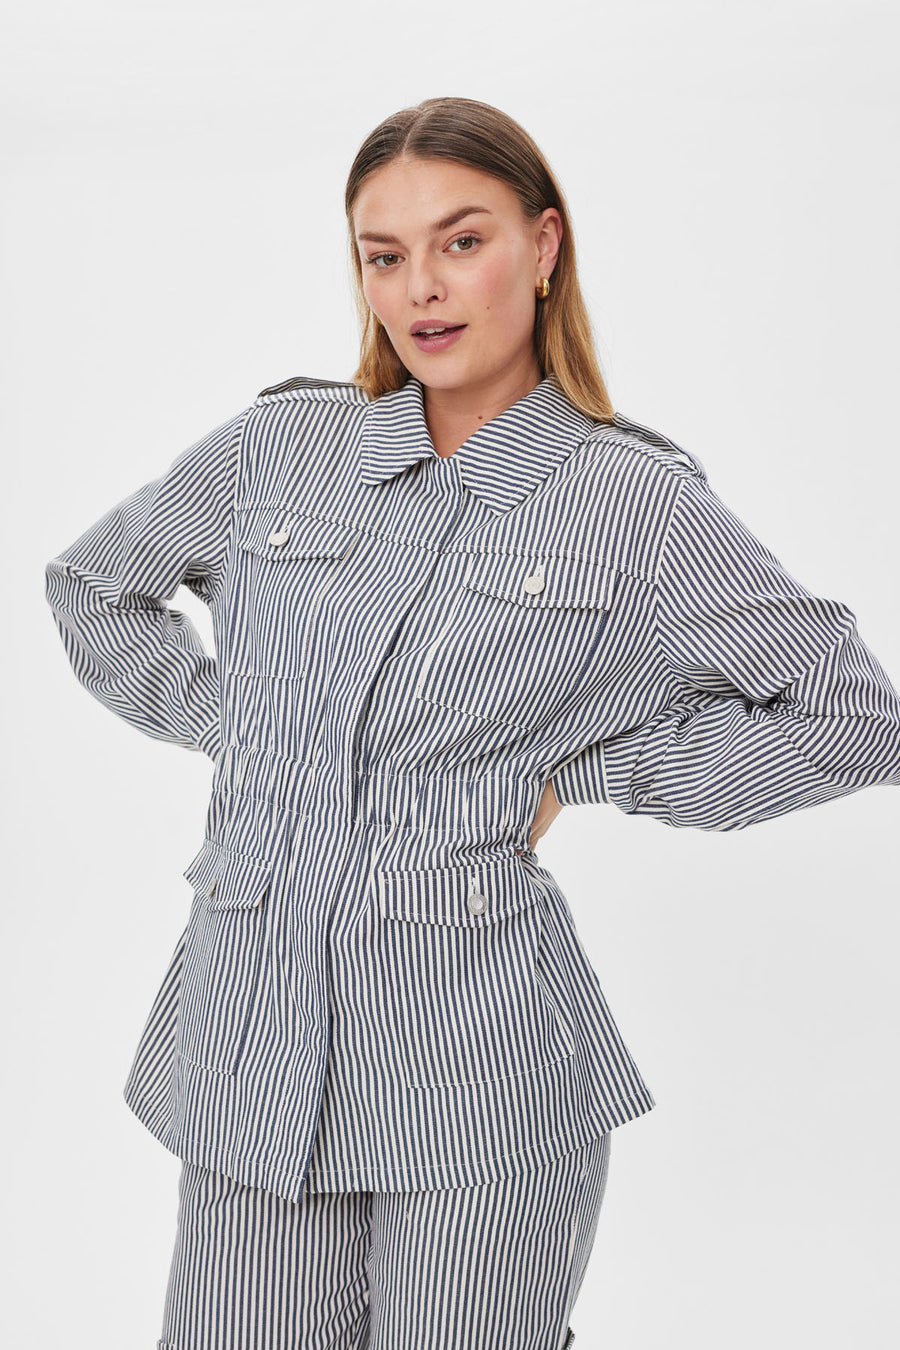 FQMELLA - STRIPED JACKET - BLUE AND WHITE